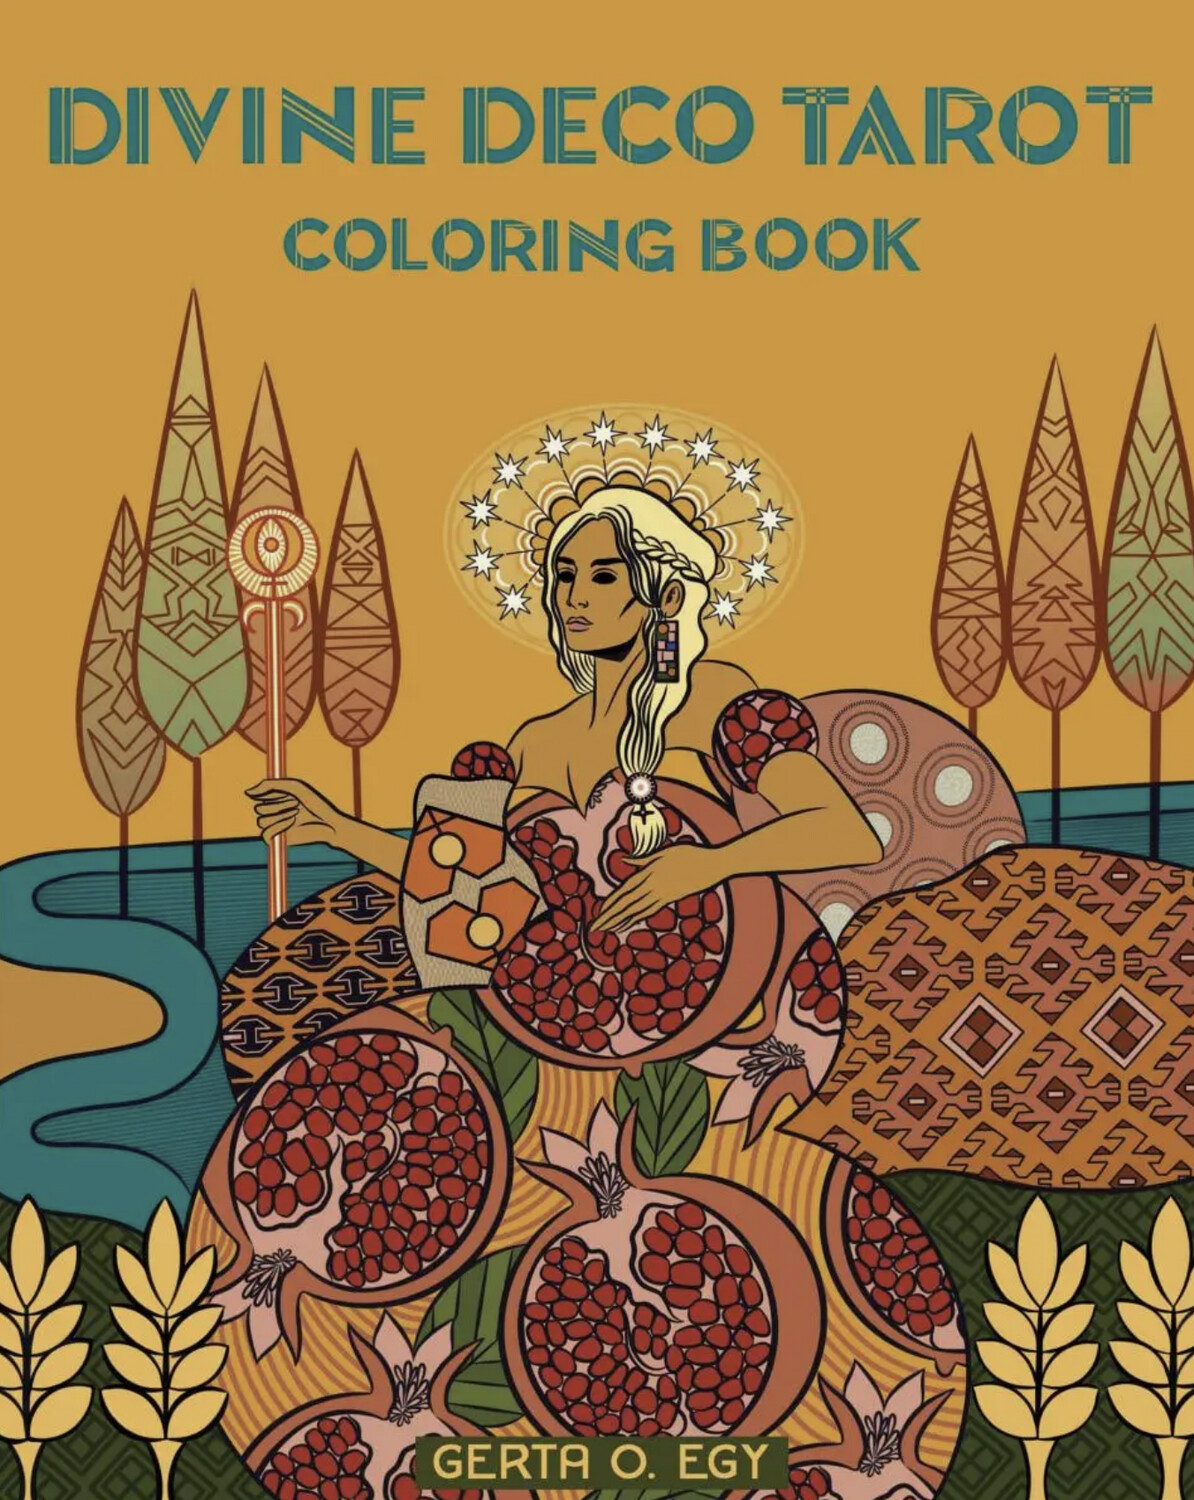 Divine Deco Tarot - Coloring Book by Gerta O. Egy